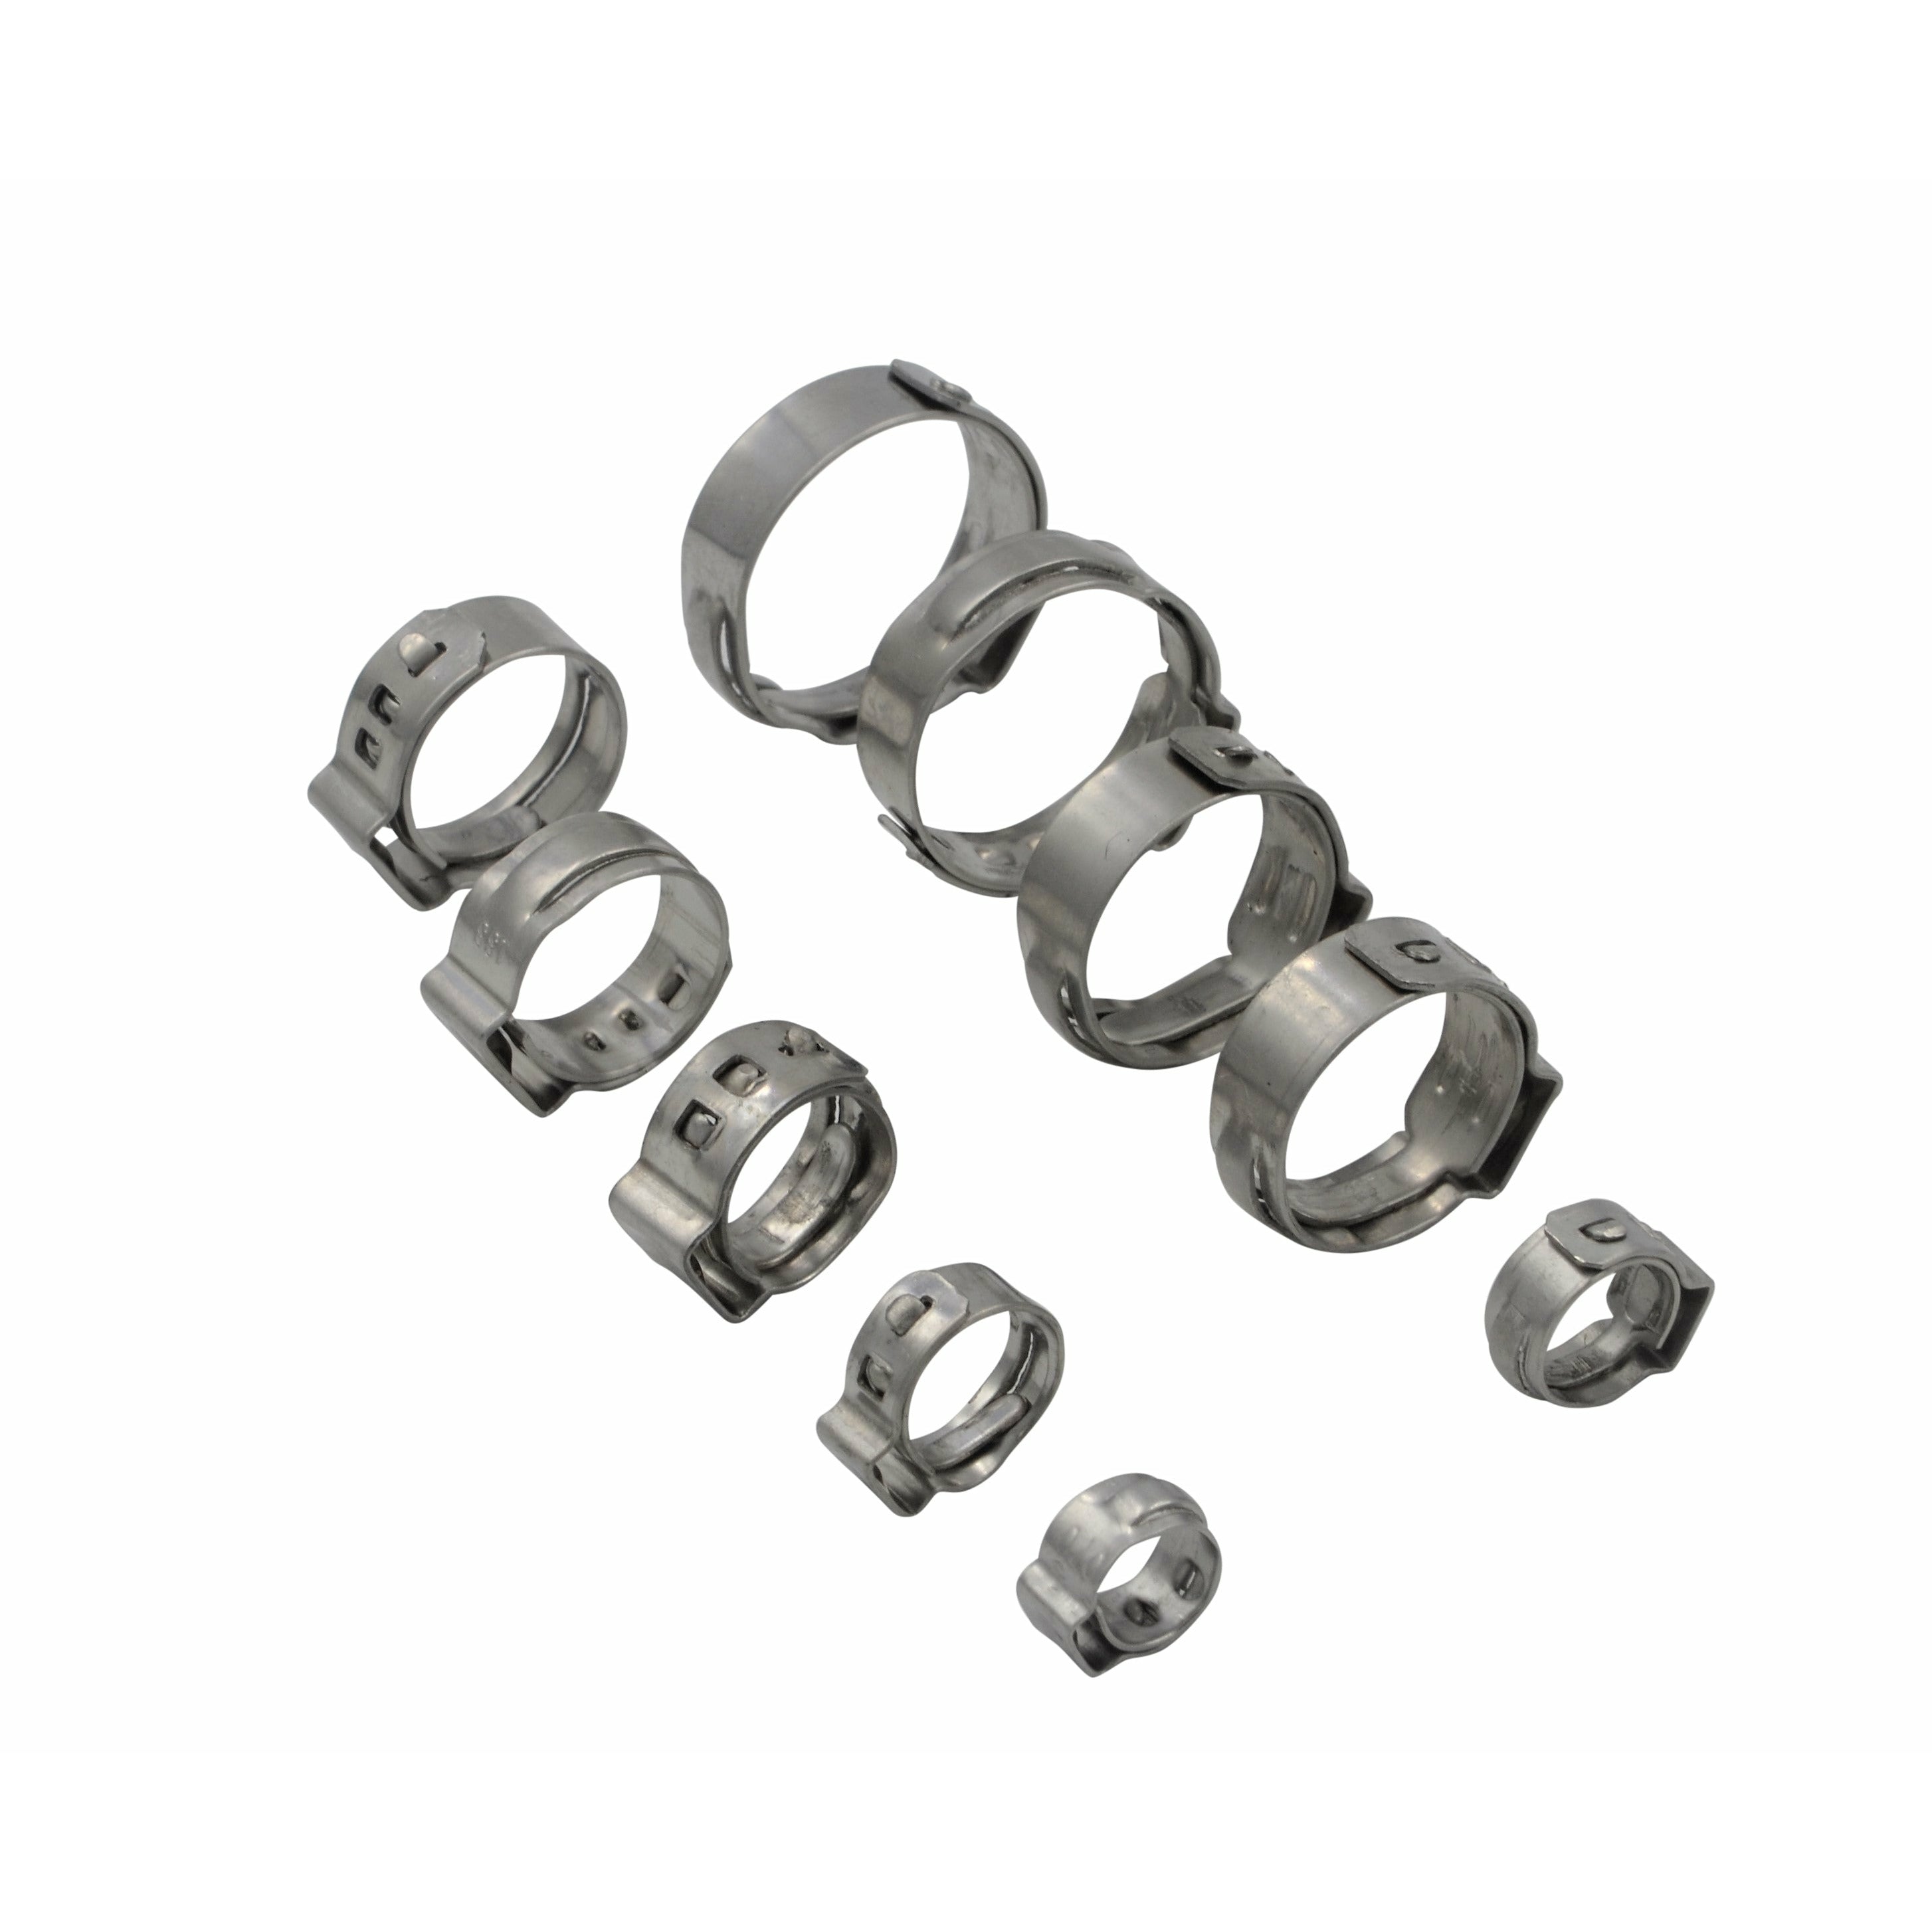 100 Piece 304 Stainless Steel 5.8-7mm Ear Hose Clamp Grab Kit Assortment 